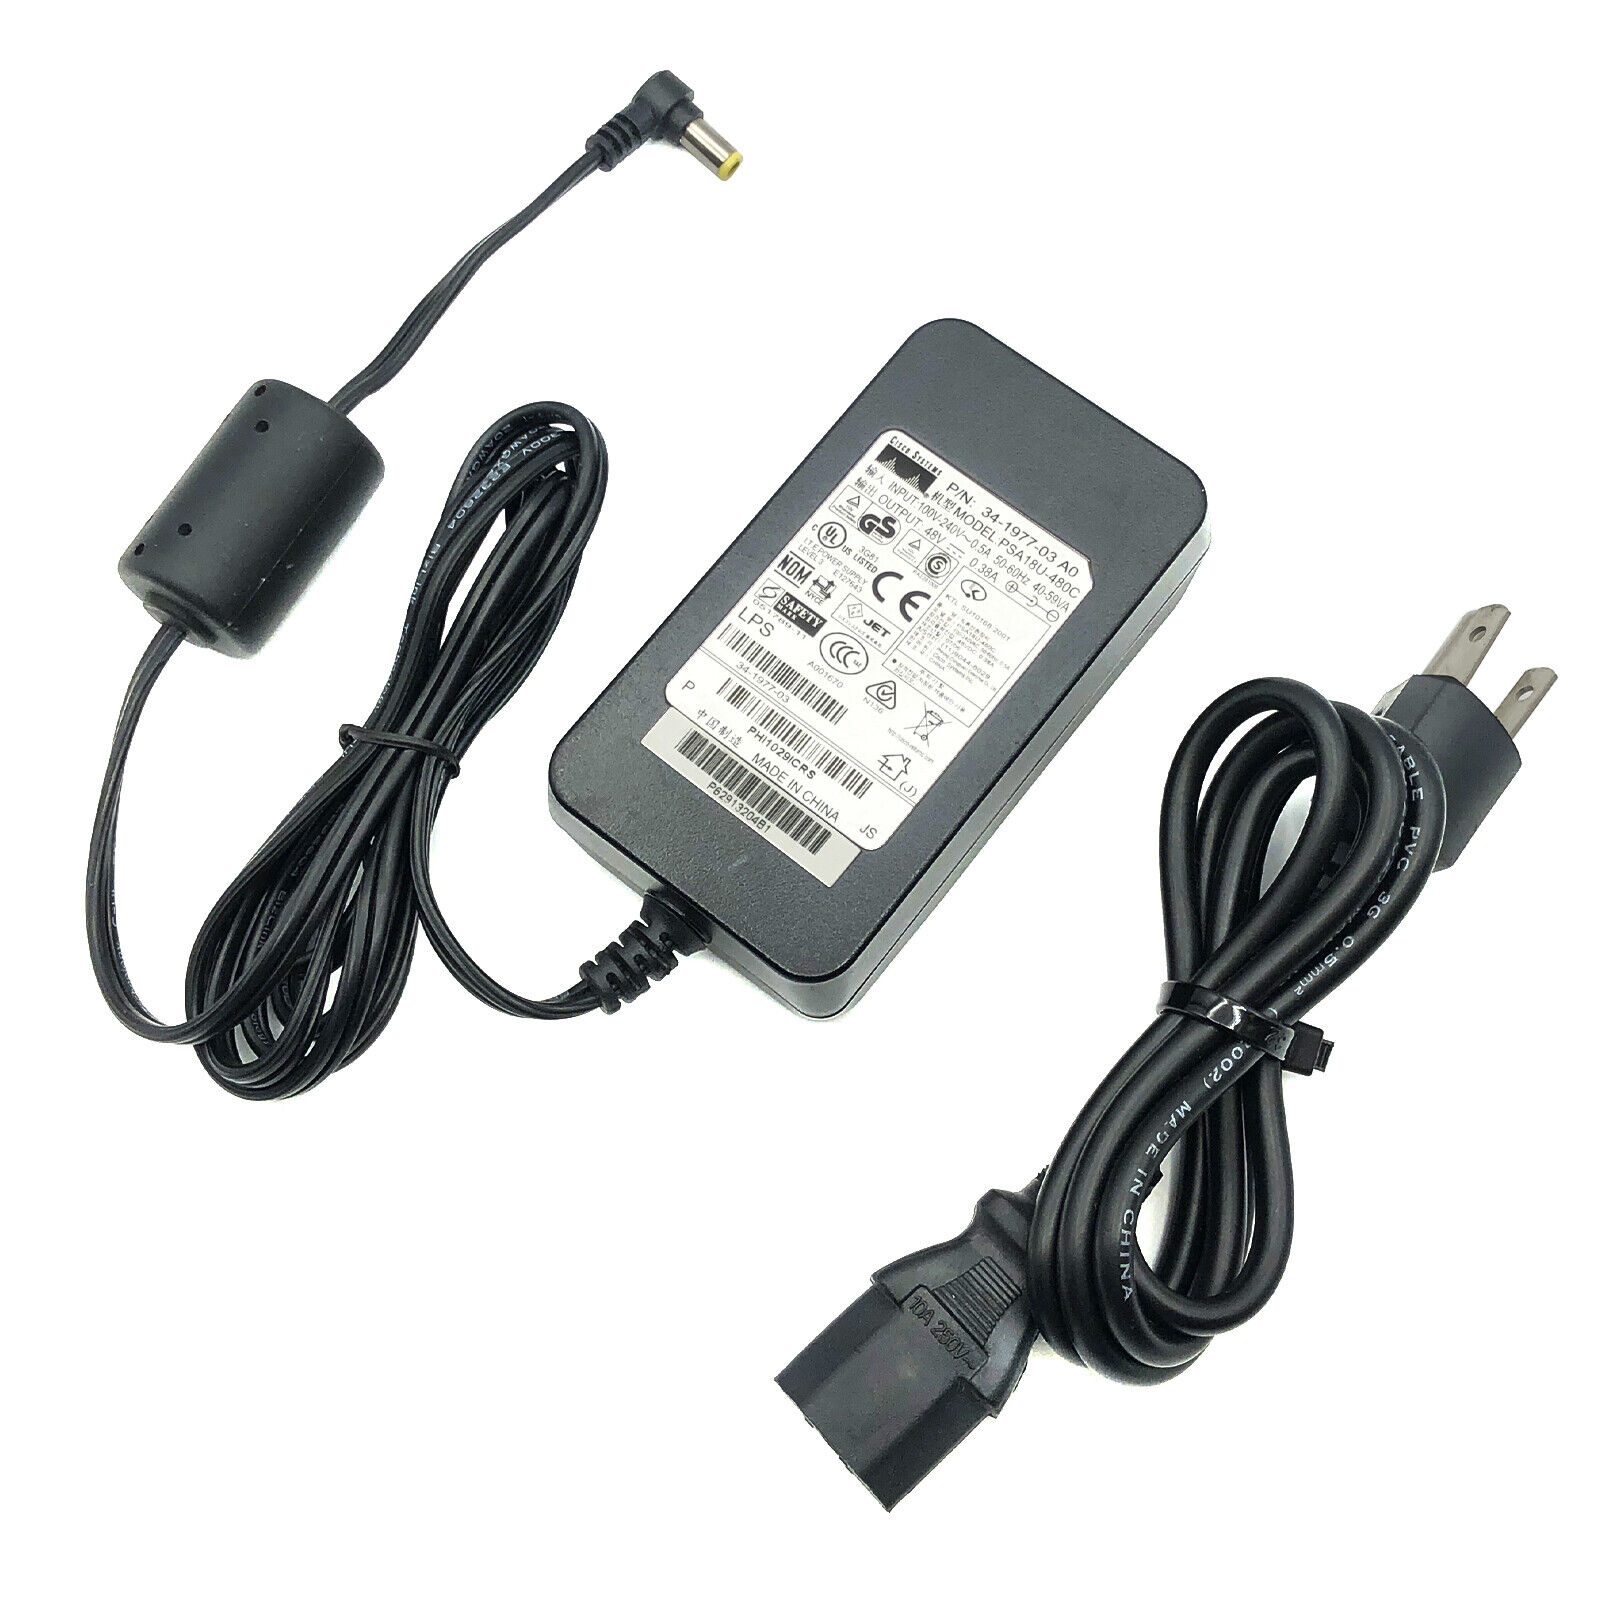 Genuine Cisco AC Adapter Power POE for IP Phones 7940 7940G 7960 7960G w/Cord